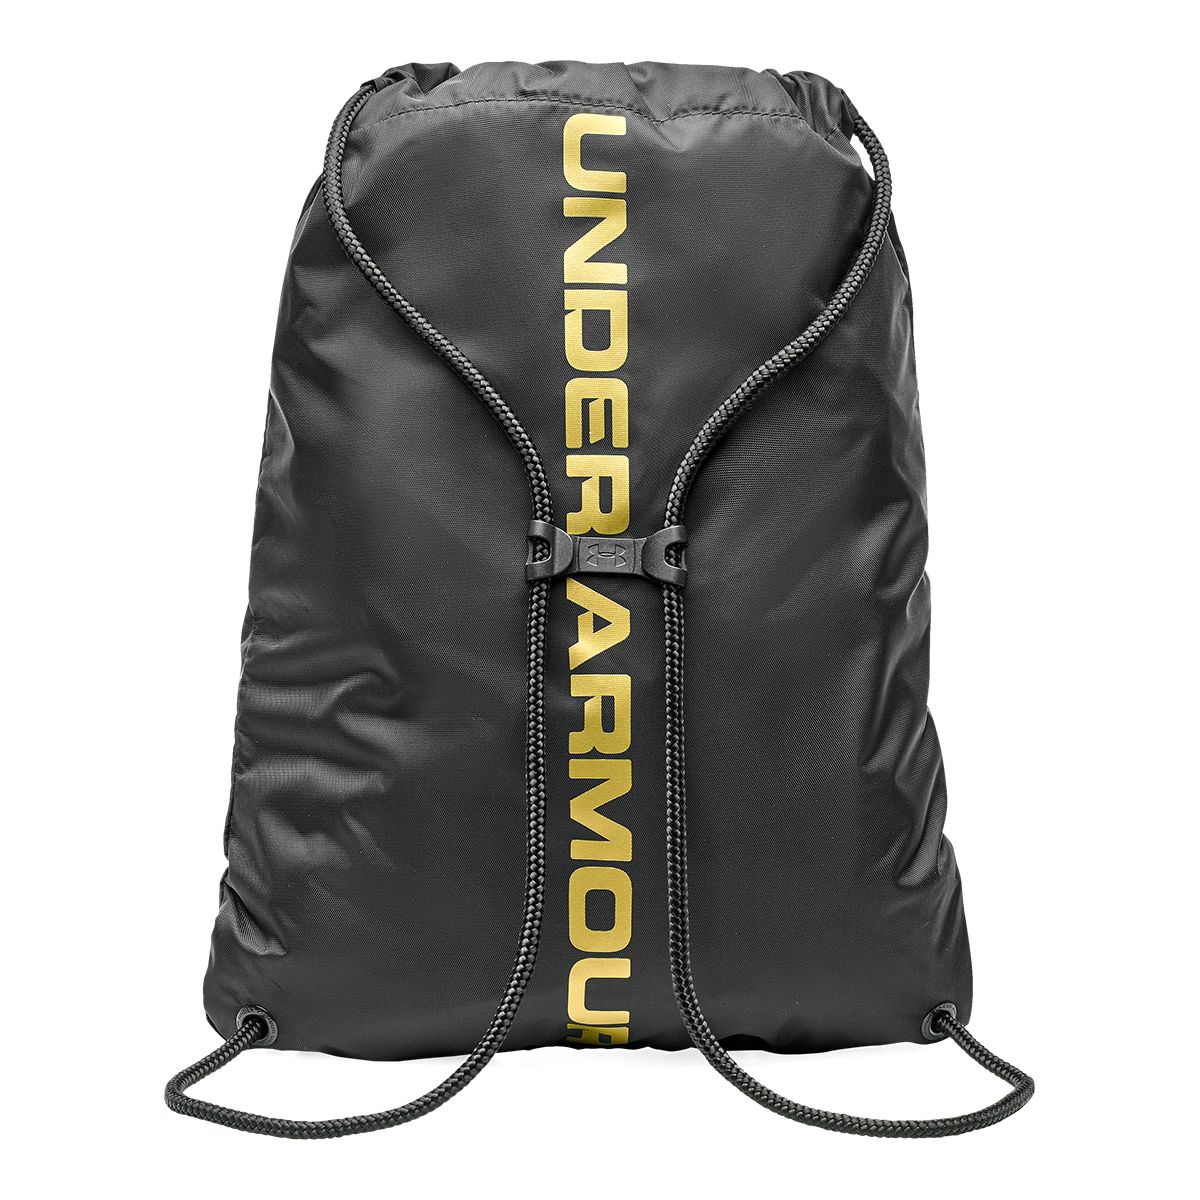 Under Armour Ozsee Sackpack/Drawstring Bag